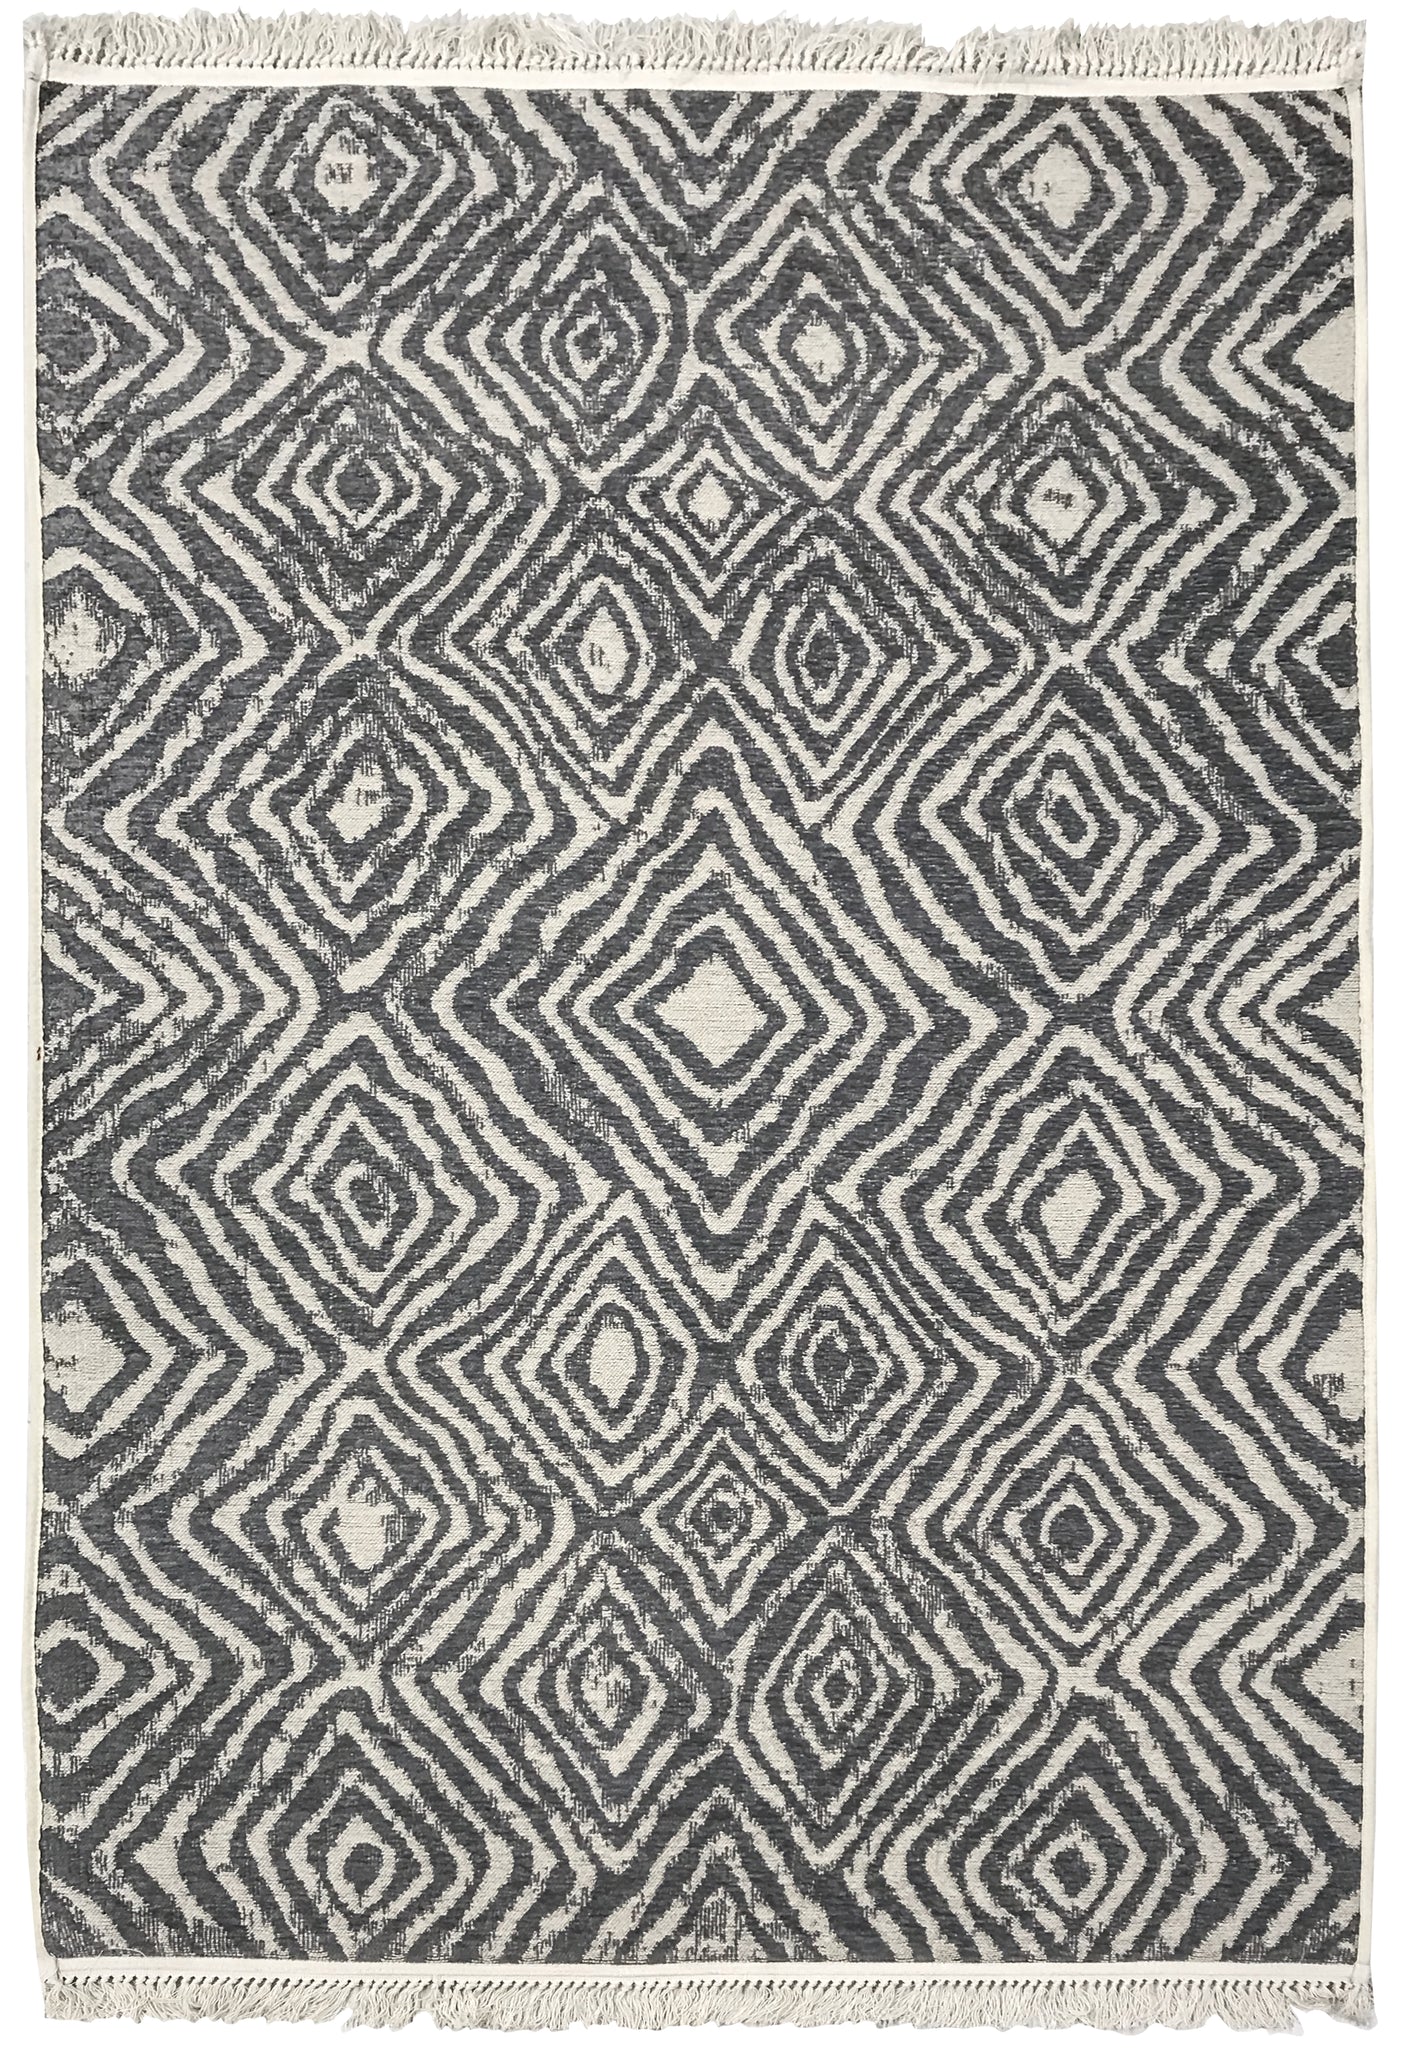 Washable Area rug | Simon & Yildirim Reversible Simple | Gray & White | 5x8 | By MotherRuggers.com | Machine Washable | Jacquard Woven | Uniquely Reversible | Pet Friendly | Kid Friendly | Machine Wash | Line Dry | Living Room | Covered Patio | Entry Way | Bedroom | High-Traffic | Three-year warranty with proper care | Shake or light Vacuum | Machine Wash as needed | Dry Flat or Line Dry | Dries fast